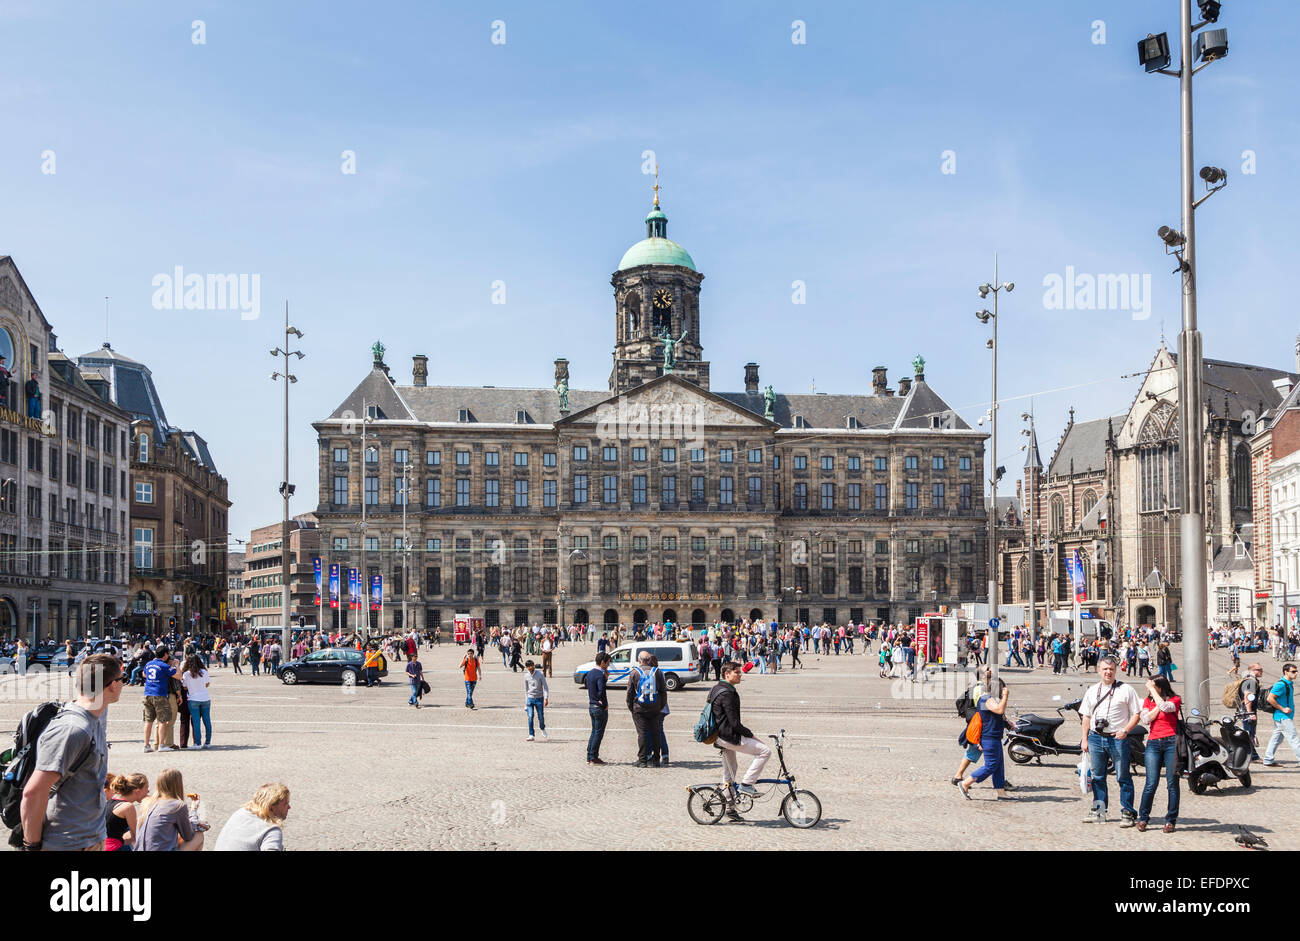 The iconic Royal Palace of Amsterdam, a landmark in Amsterdam, Netherlands with a crowd of tourists in Dam Square on a sunny day with a blue sky Stock Photo